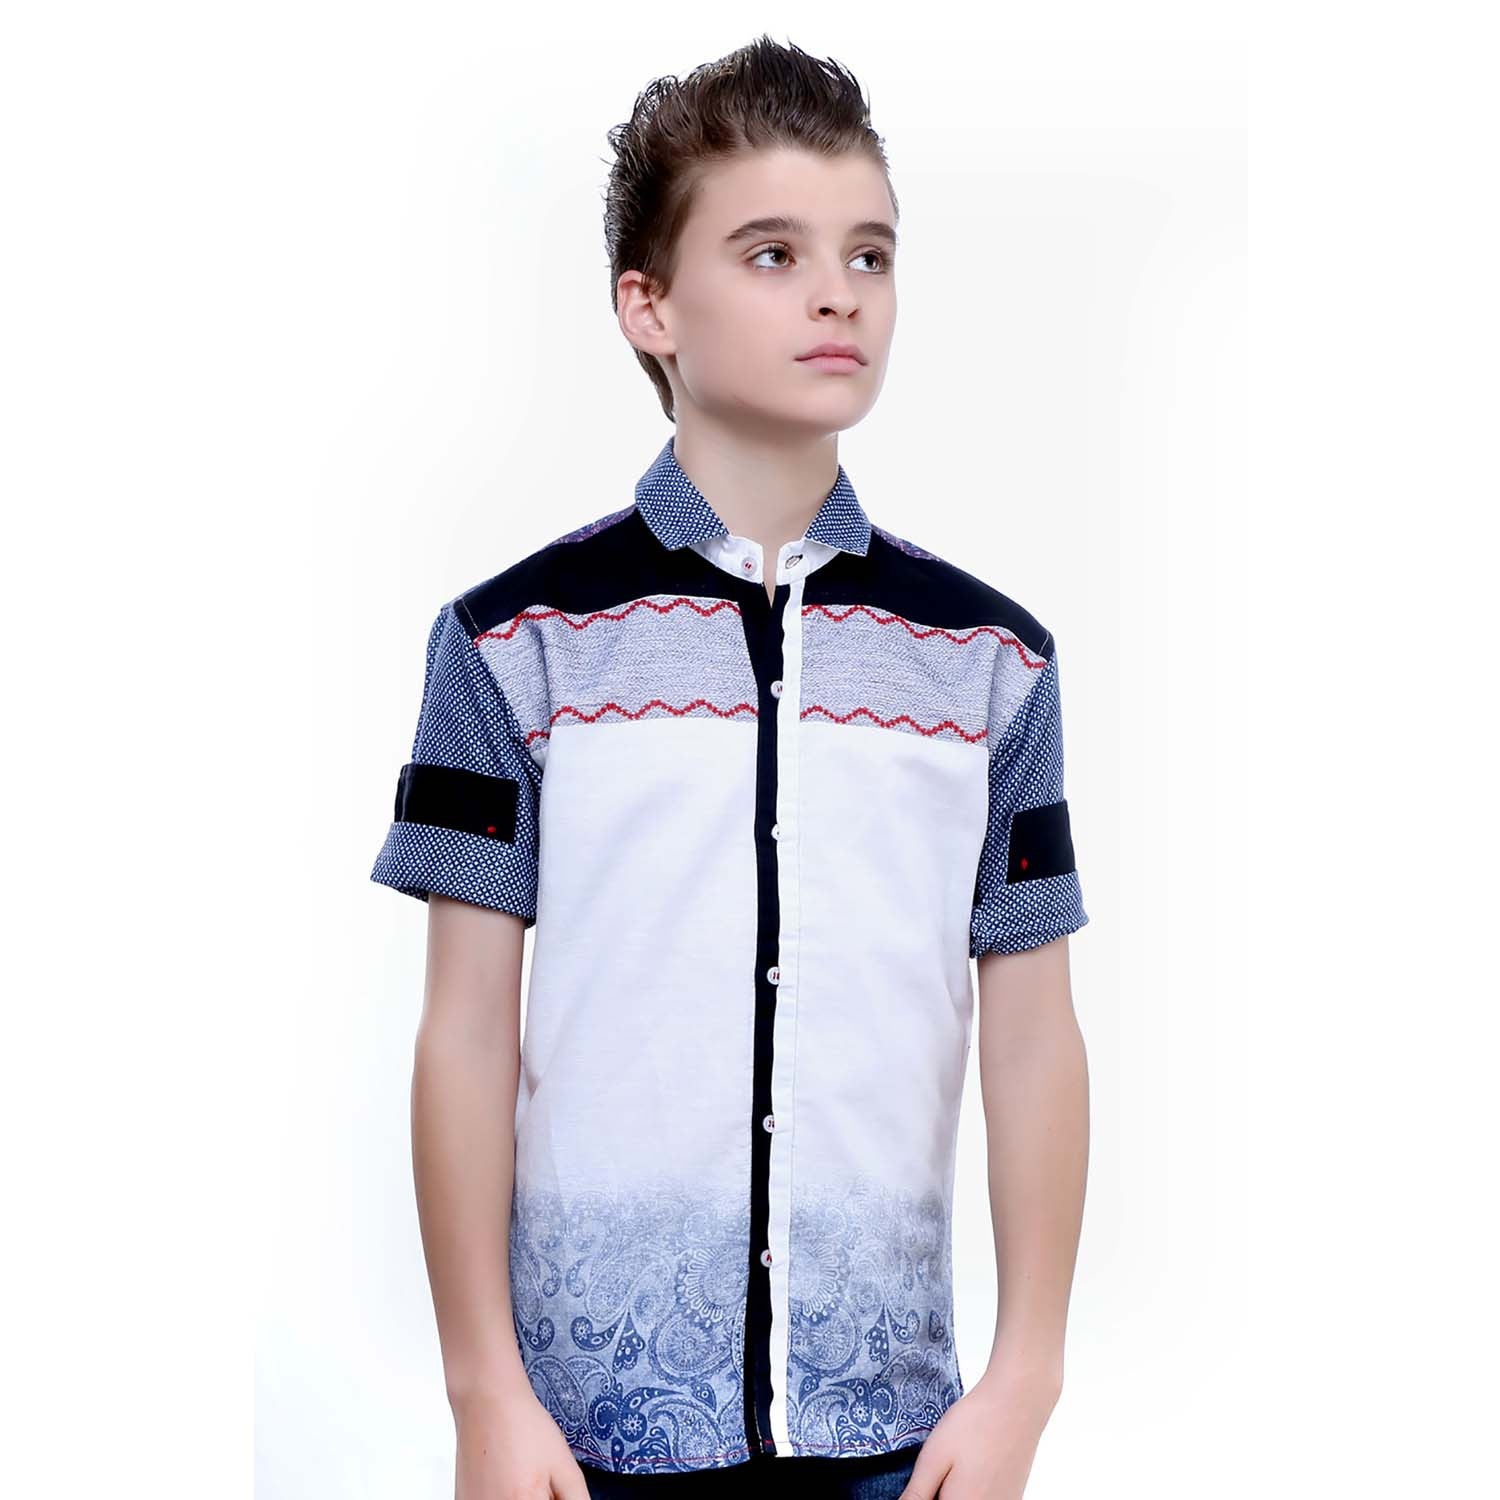 Designer Party Shirts for Young Boys (6-16 years) for Festive